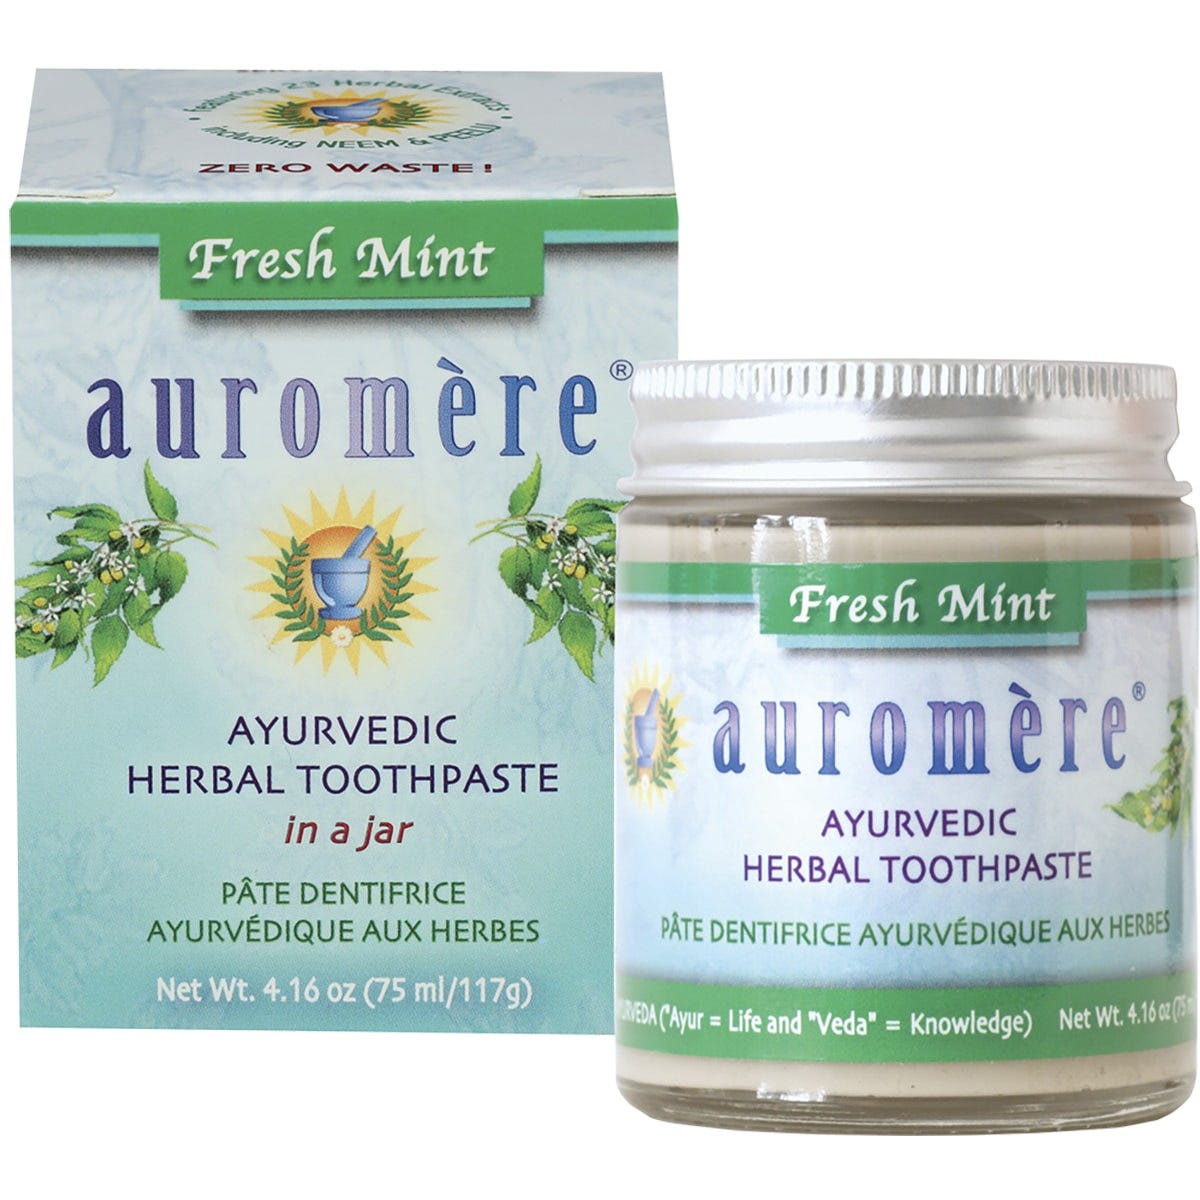 Auromere Toothpaste Ayurvedic Fresh Mint Toothpaste in a Jar 117g - Dr Earth - Oral Care